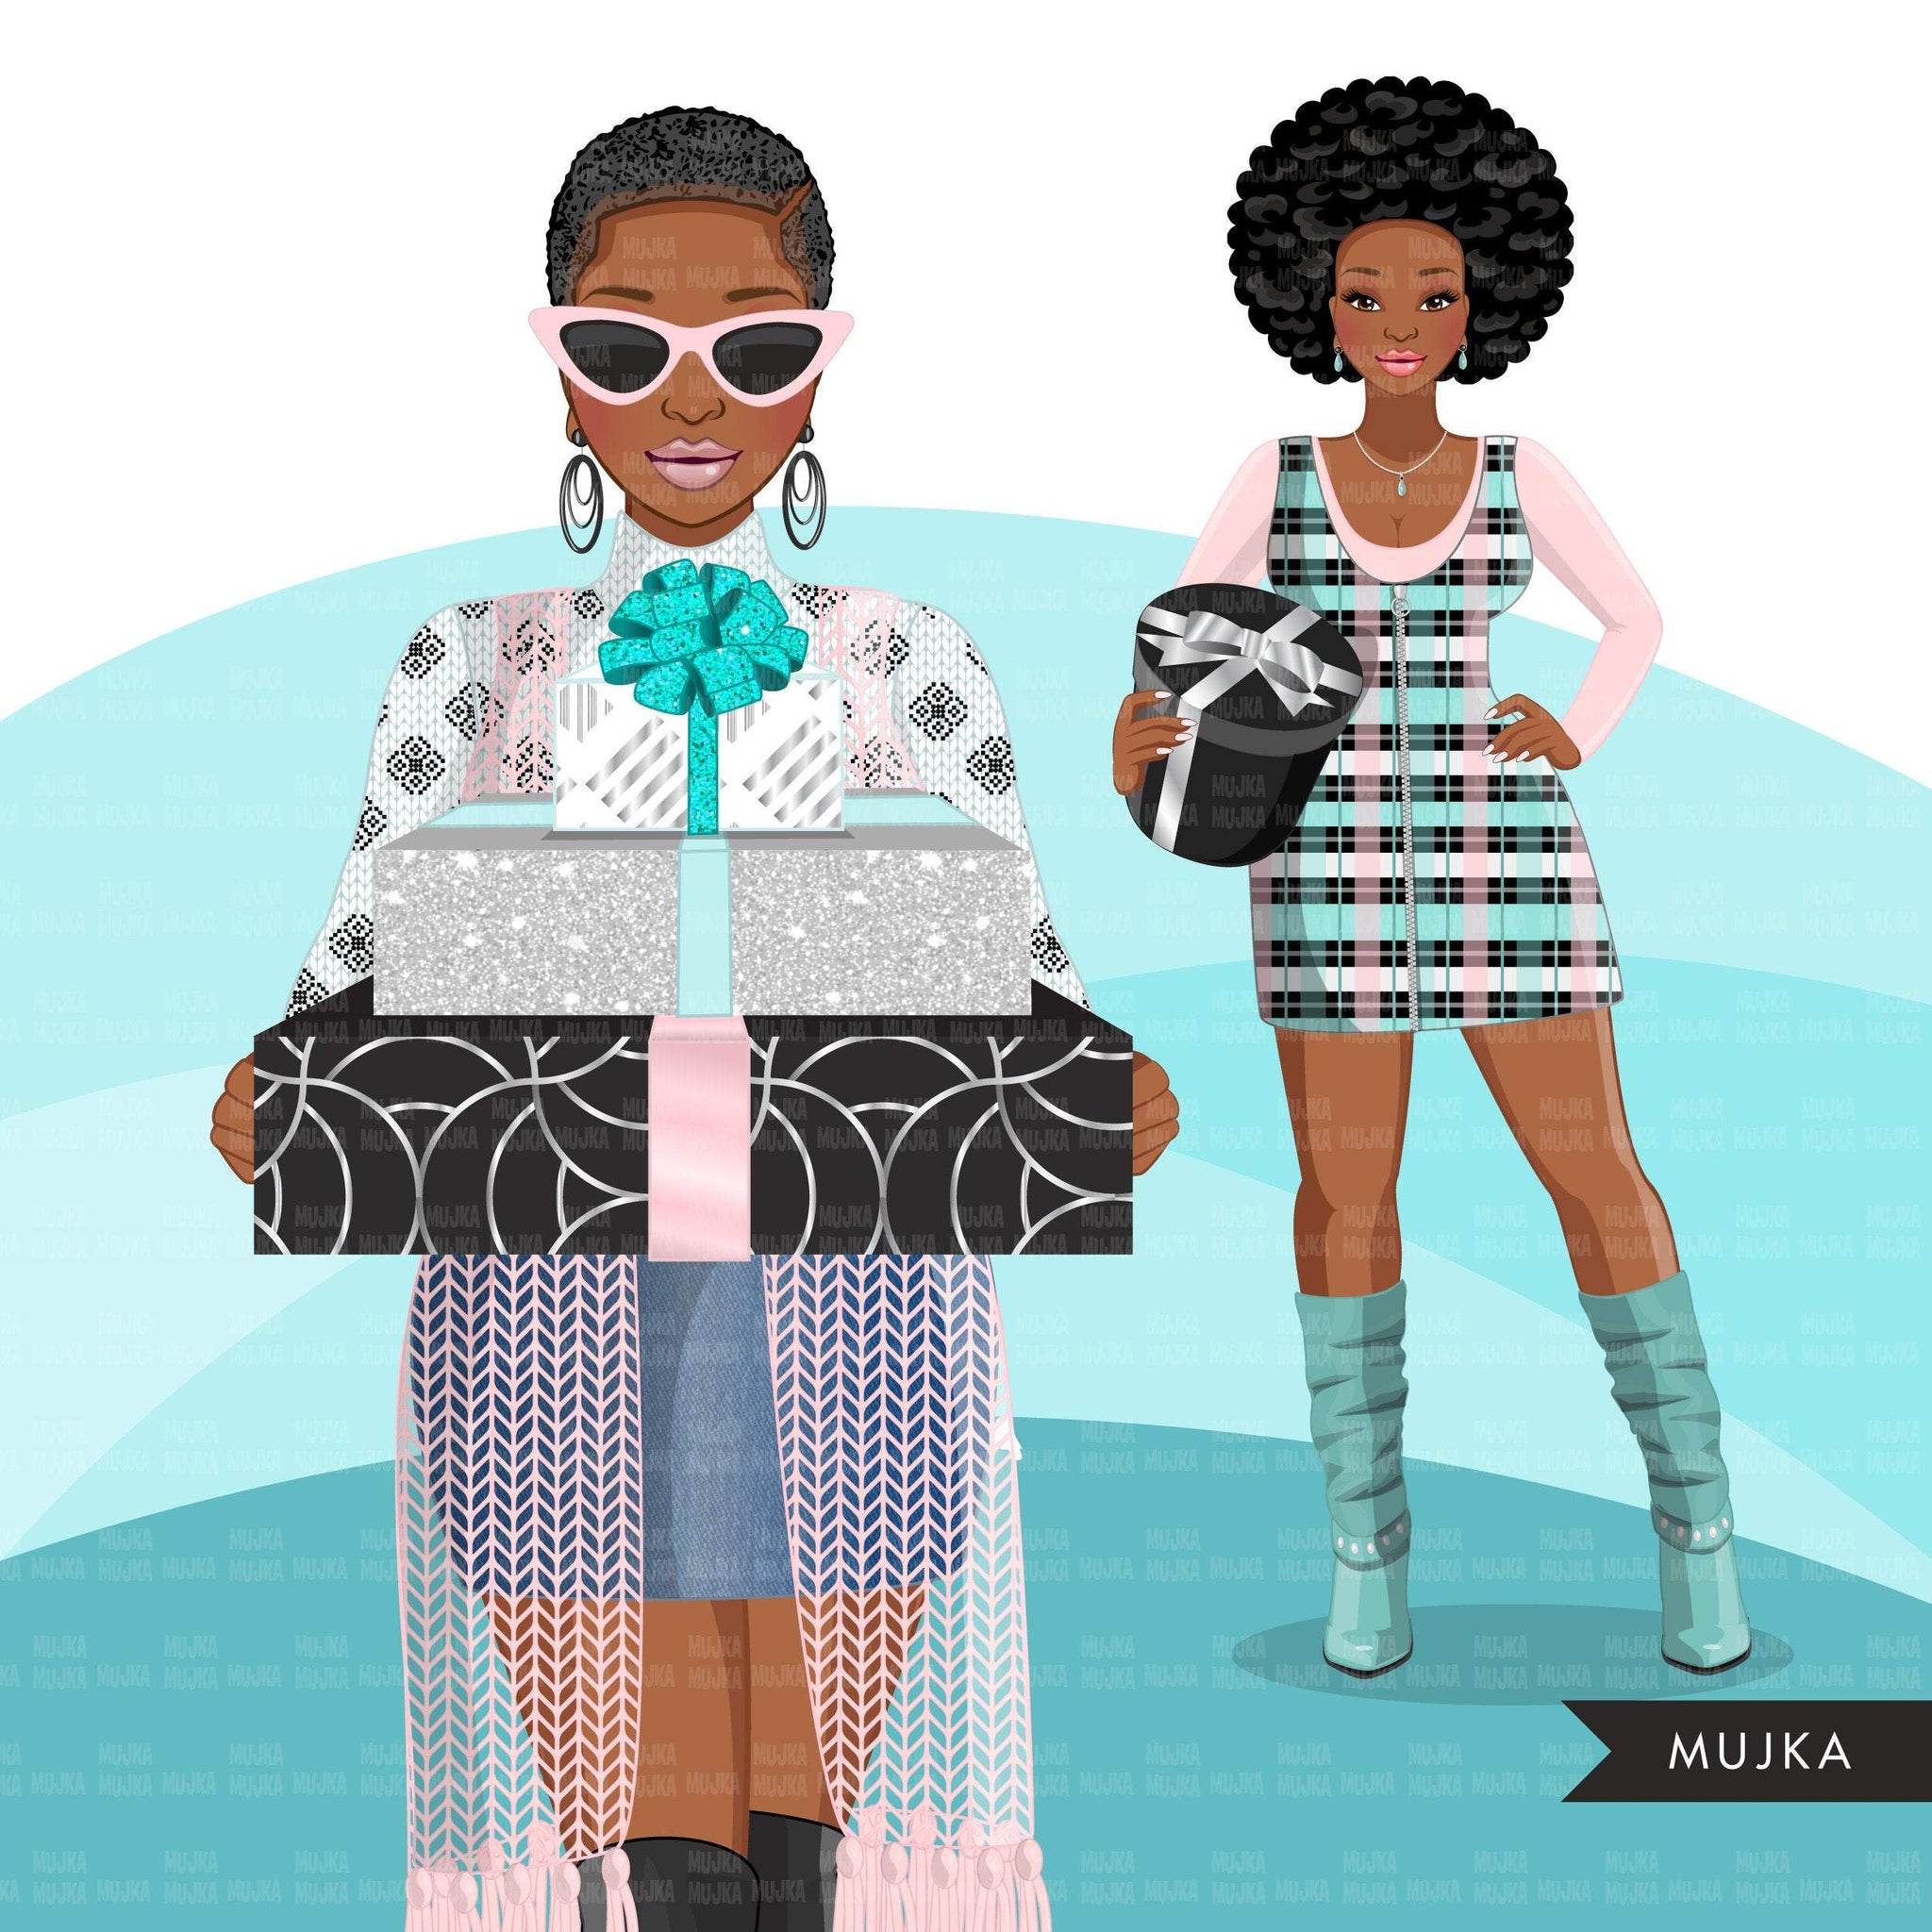 Black Women Winter Outfits Clipart PNG Graphic by mirazooze